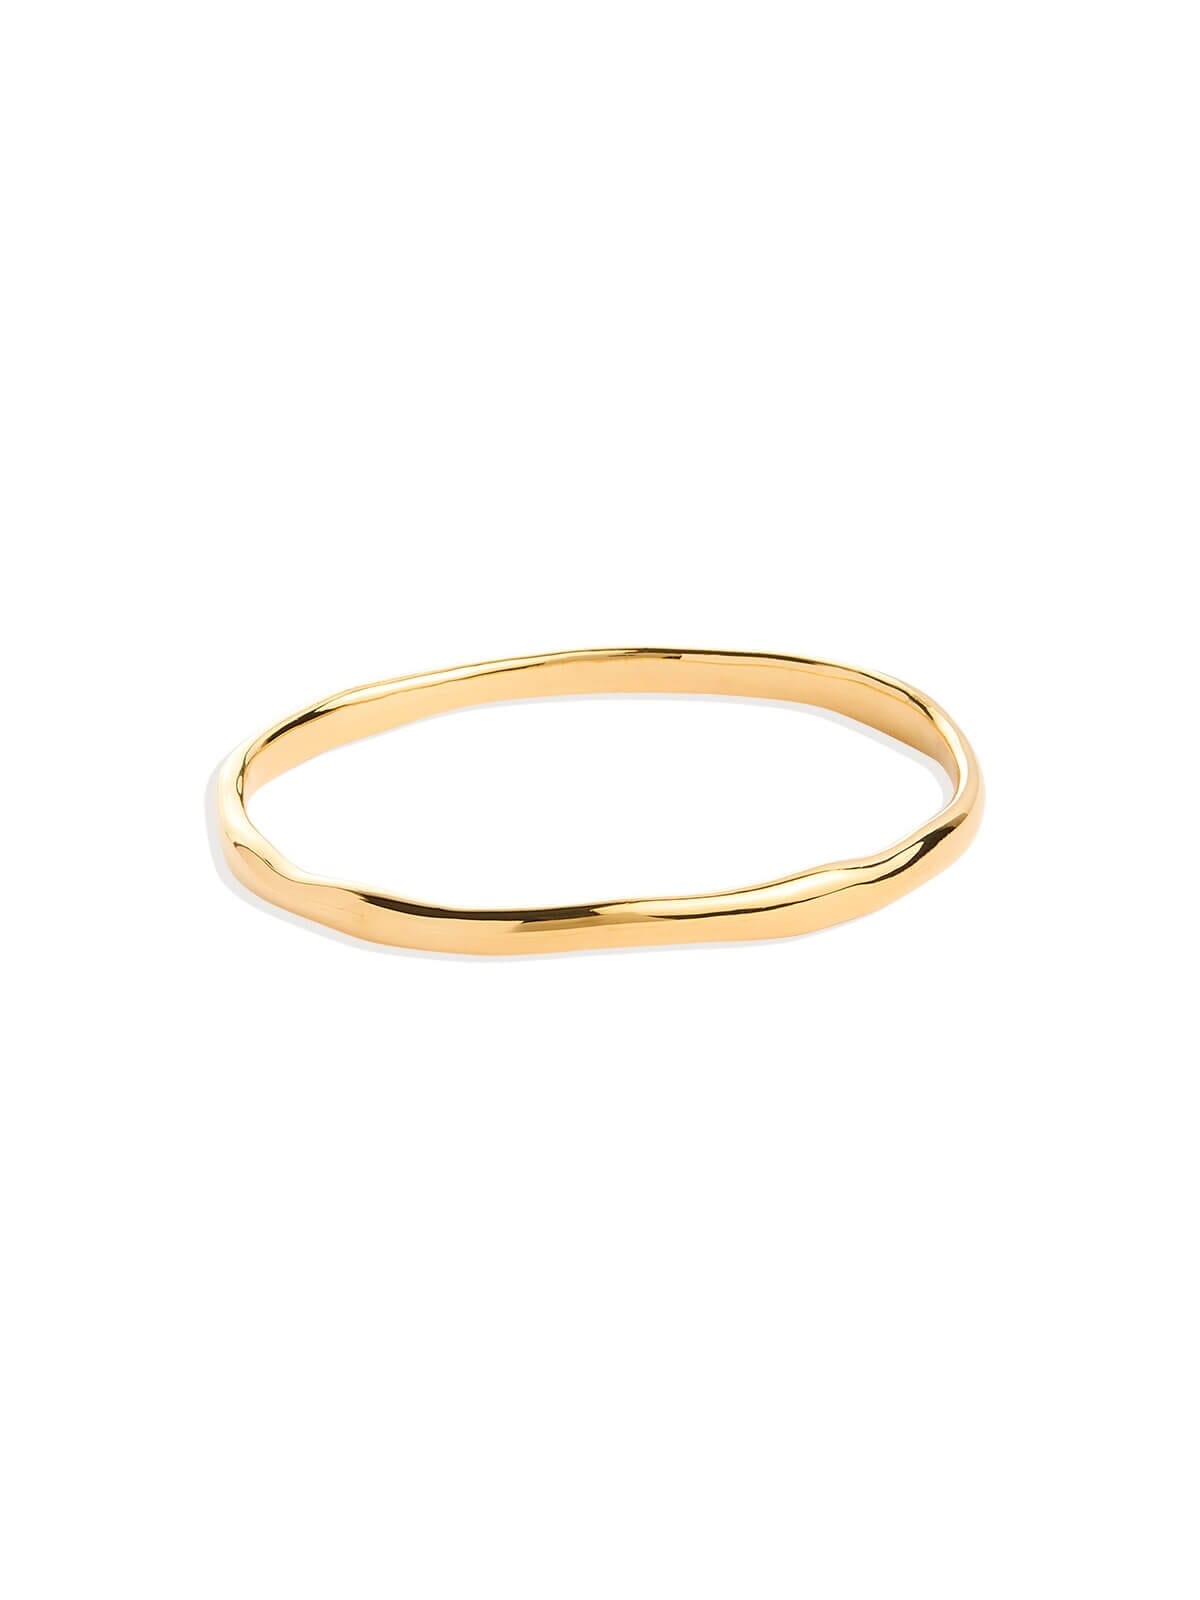 By Charlotte | Lover Bangle - Gold | Perlu